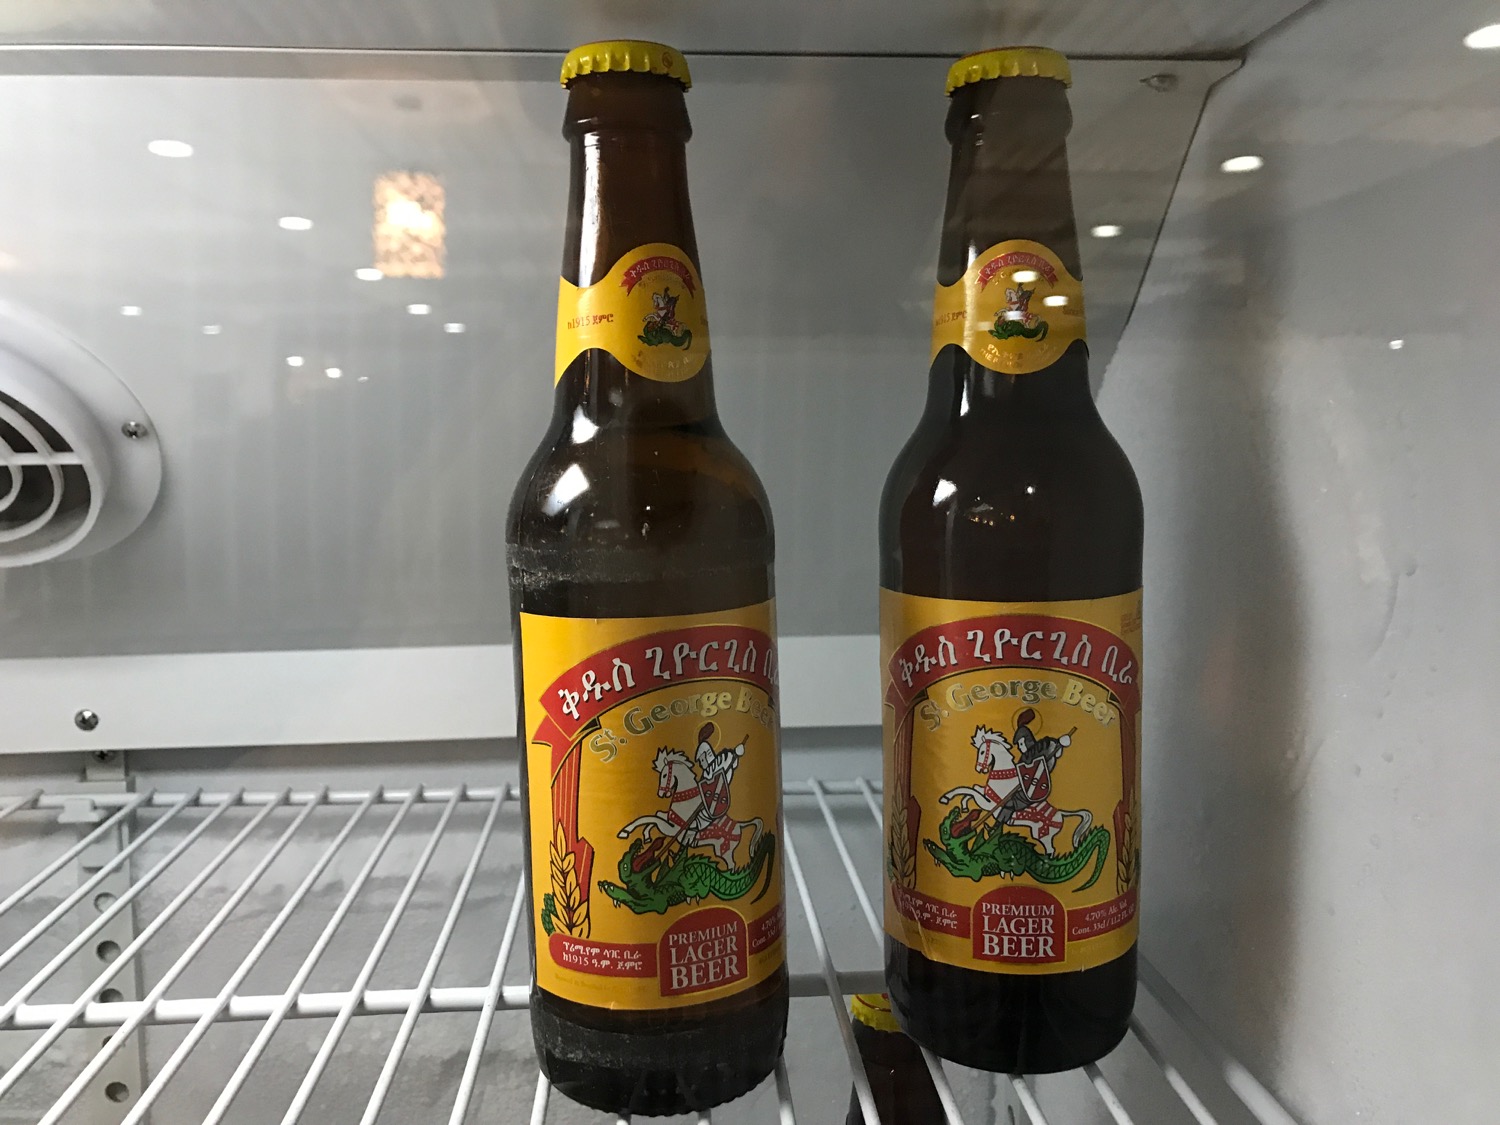 two bottles of beer in a refrigerator